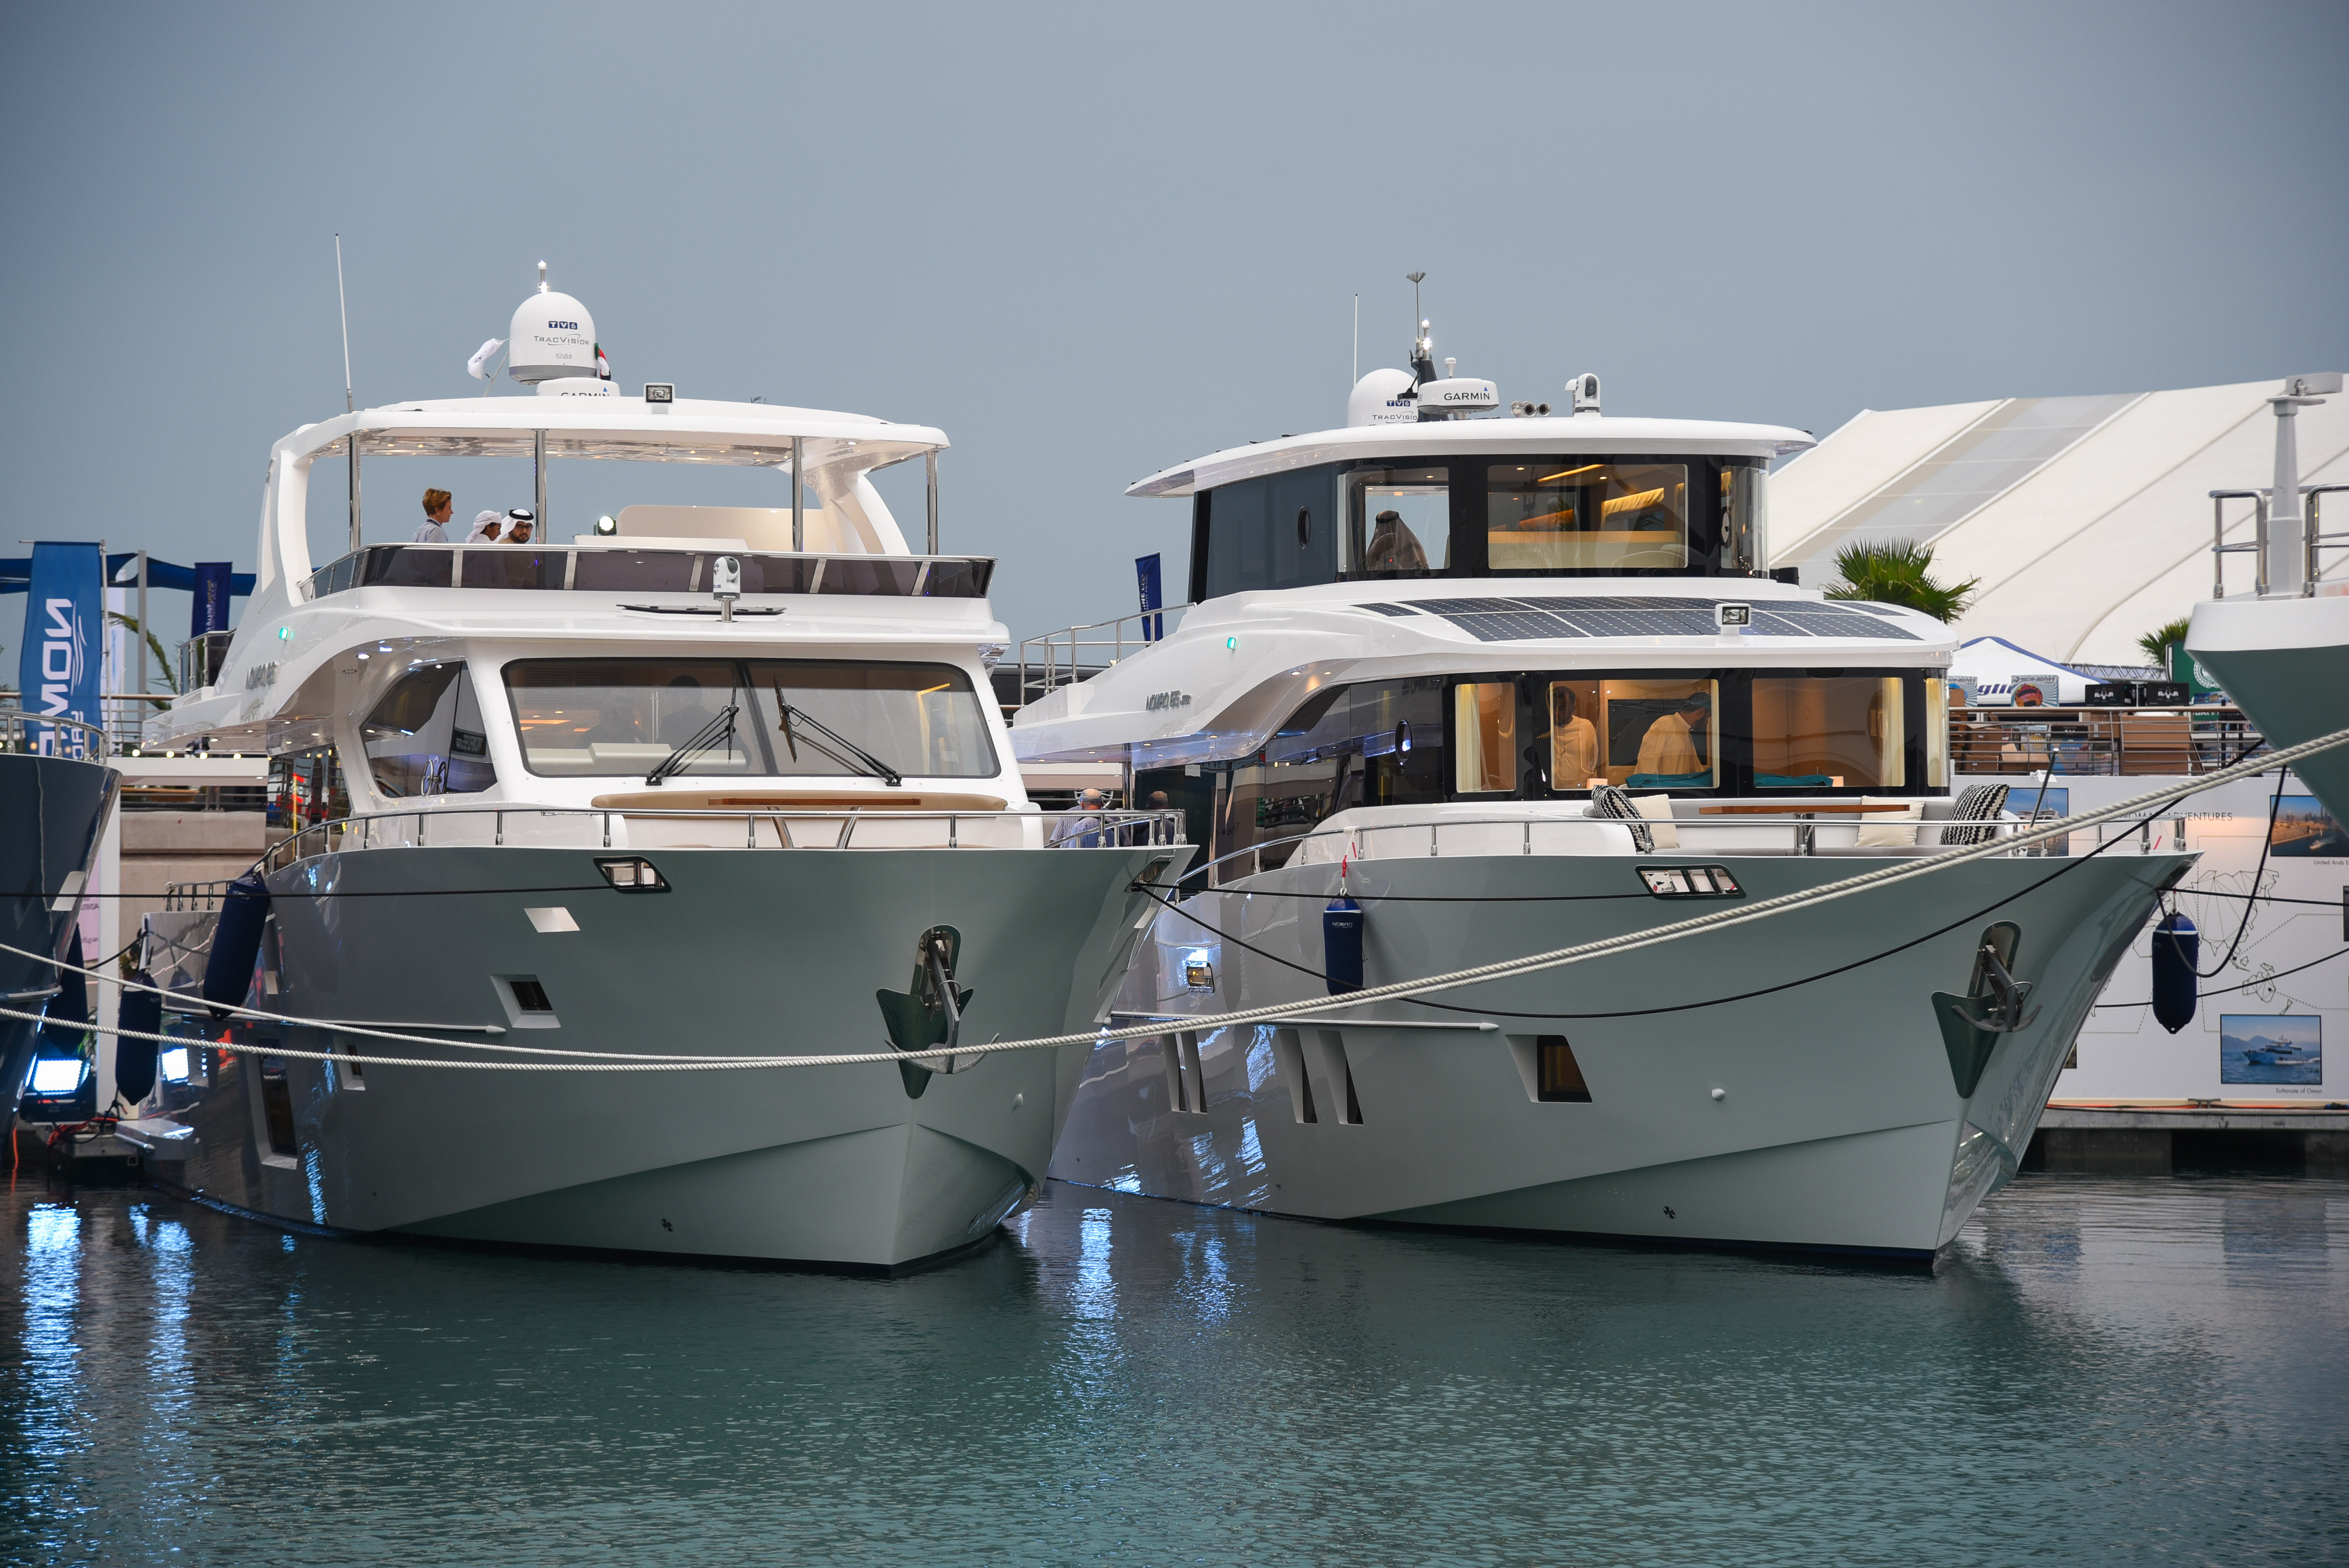 Gulf Craft's Nomad 65 & Nomad 65 SUV at the Dubai Boat Show